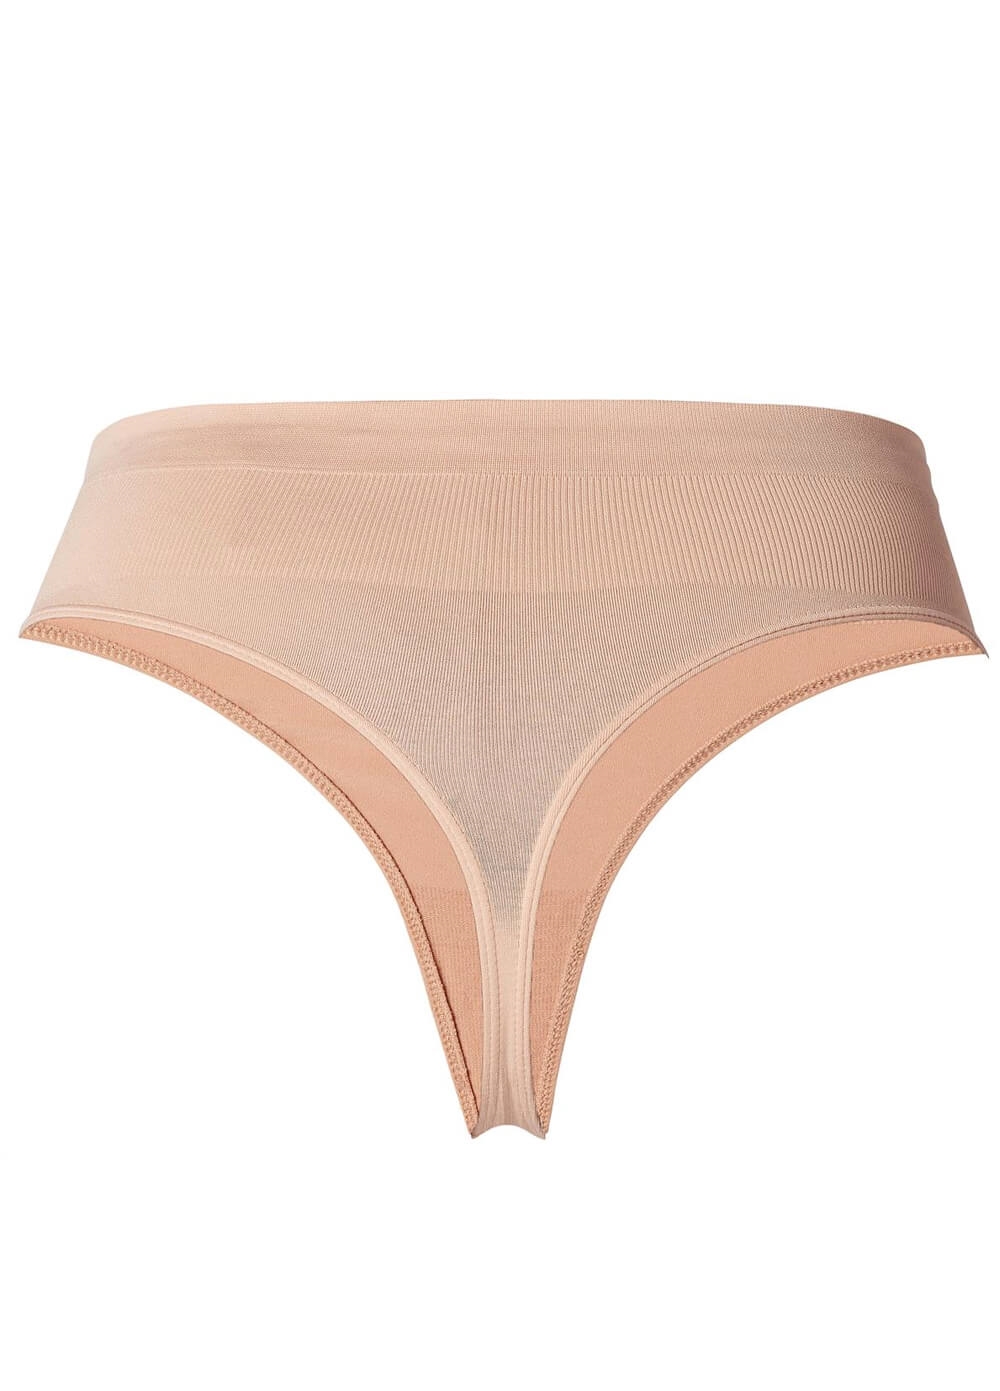 Noppies - Seamless Maternity G-String Brief in Nude | Queen Bee